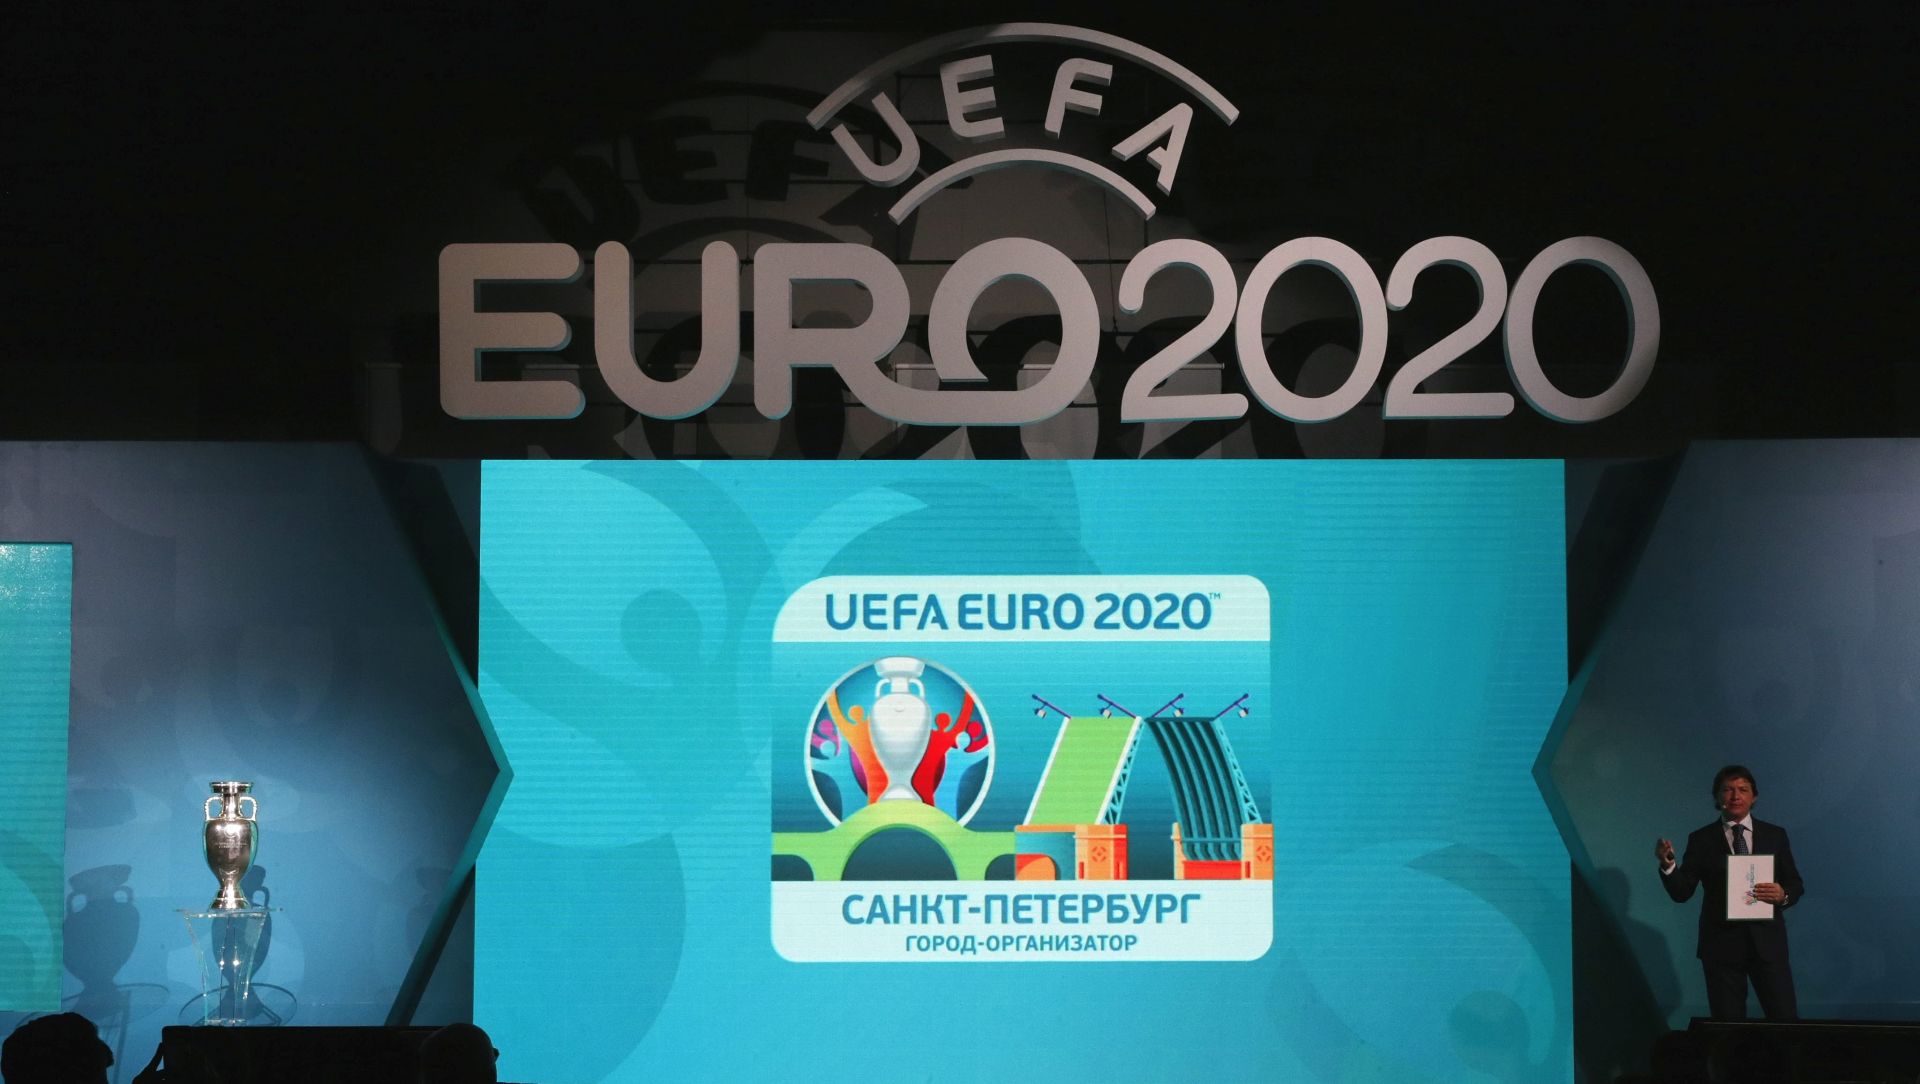 epa05730407 General view of the stage during the presentation of the UEFA EURO 2020 logo in St. Petersburg, Russia, 19 January 2017. Thirteen countries are due to host games of the UEFA EURO 2020. Three group matches and a quarter final match of the tournament will be held in St. Petersburg.  EPA/ANATOLY MALTSEV